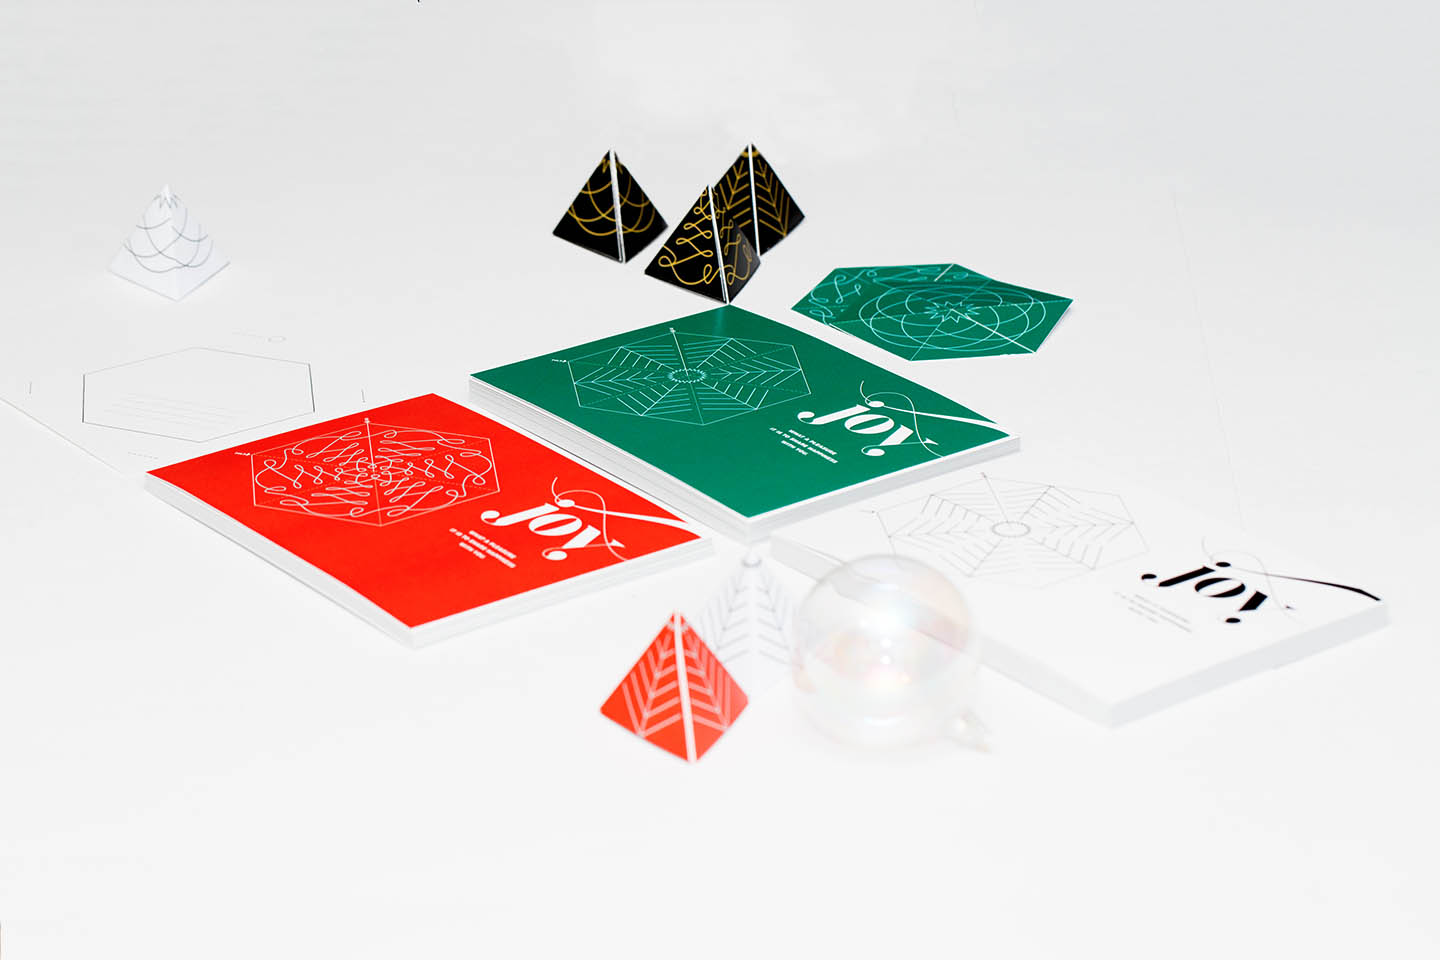 Wunderfold in its card form, punched out hexagon form, and folded 3D tree form in green, red, and black